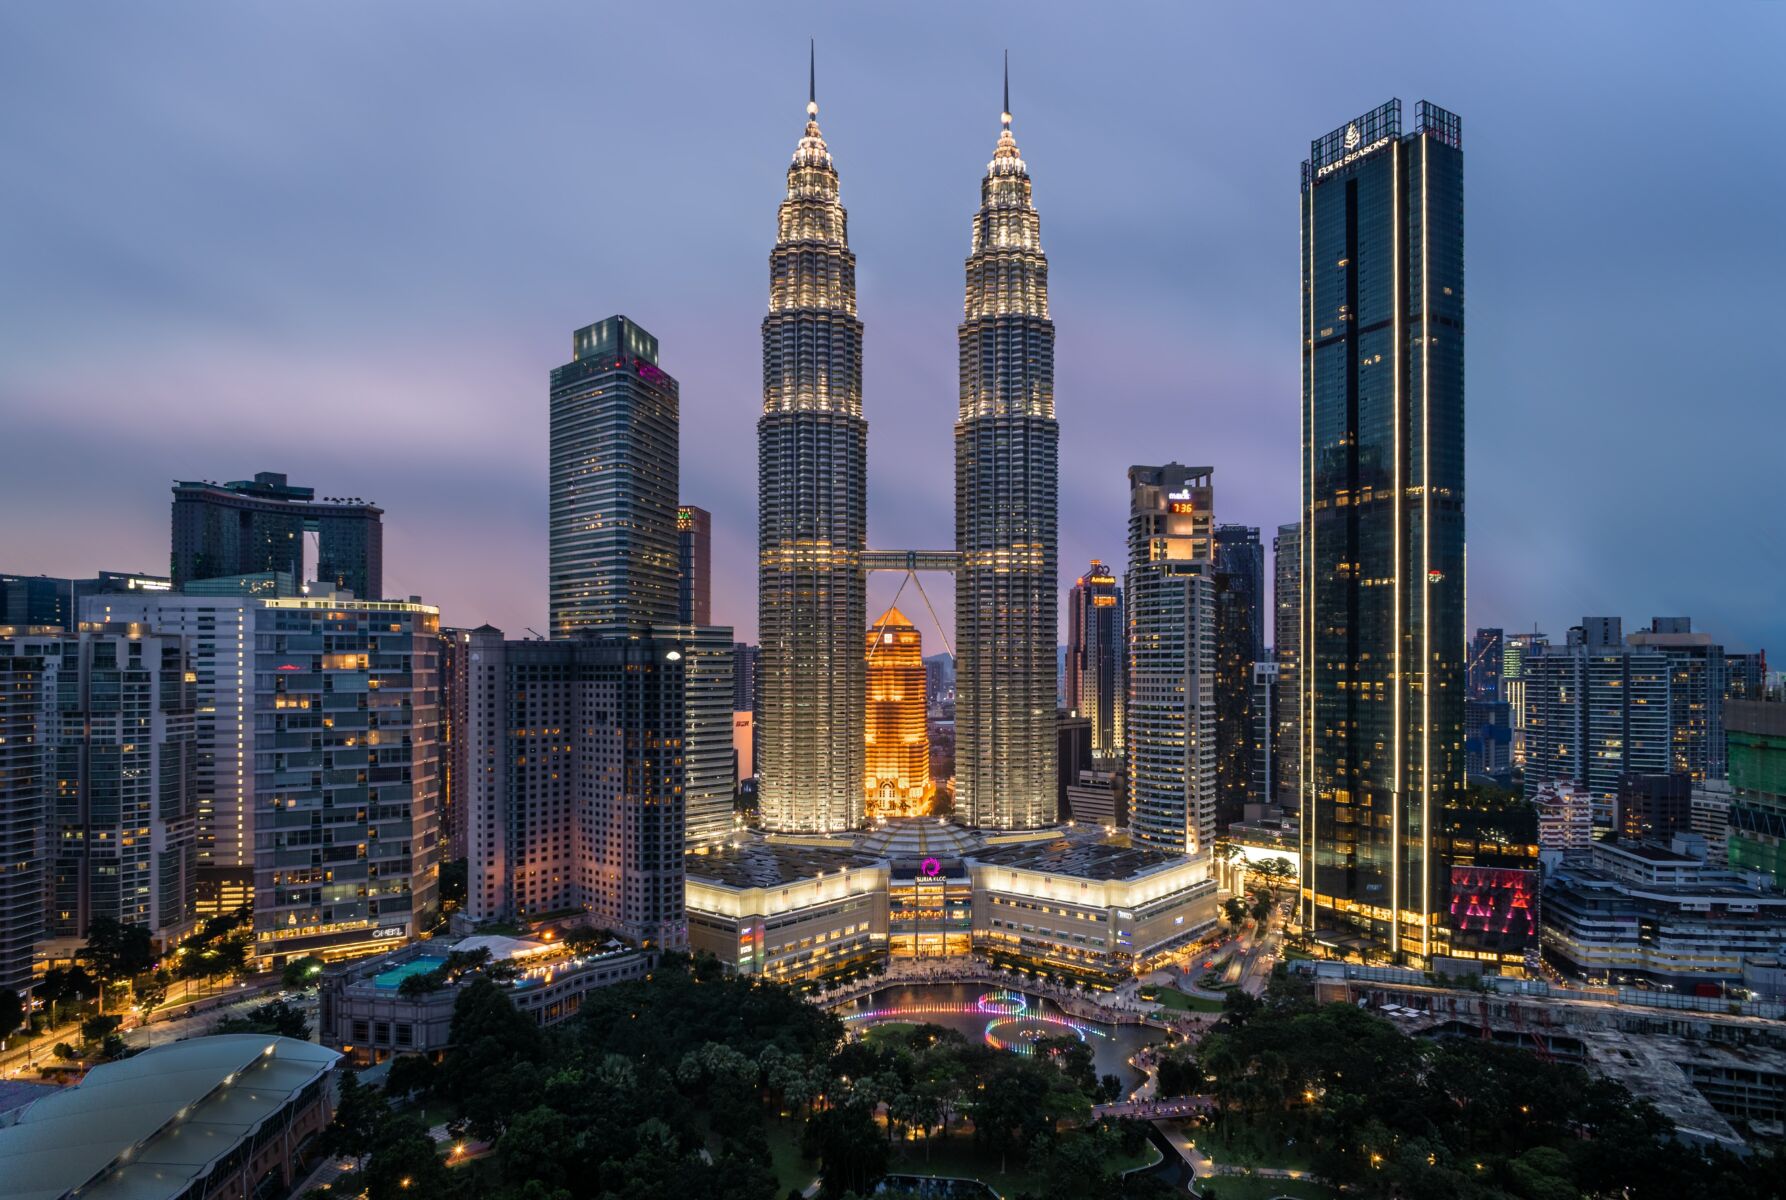 Malaysia’s economy exceeds expectations with 5.6% growth in first quarter